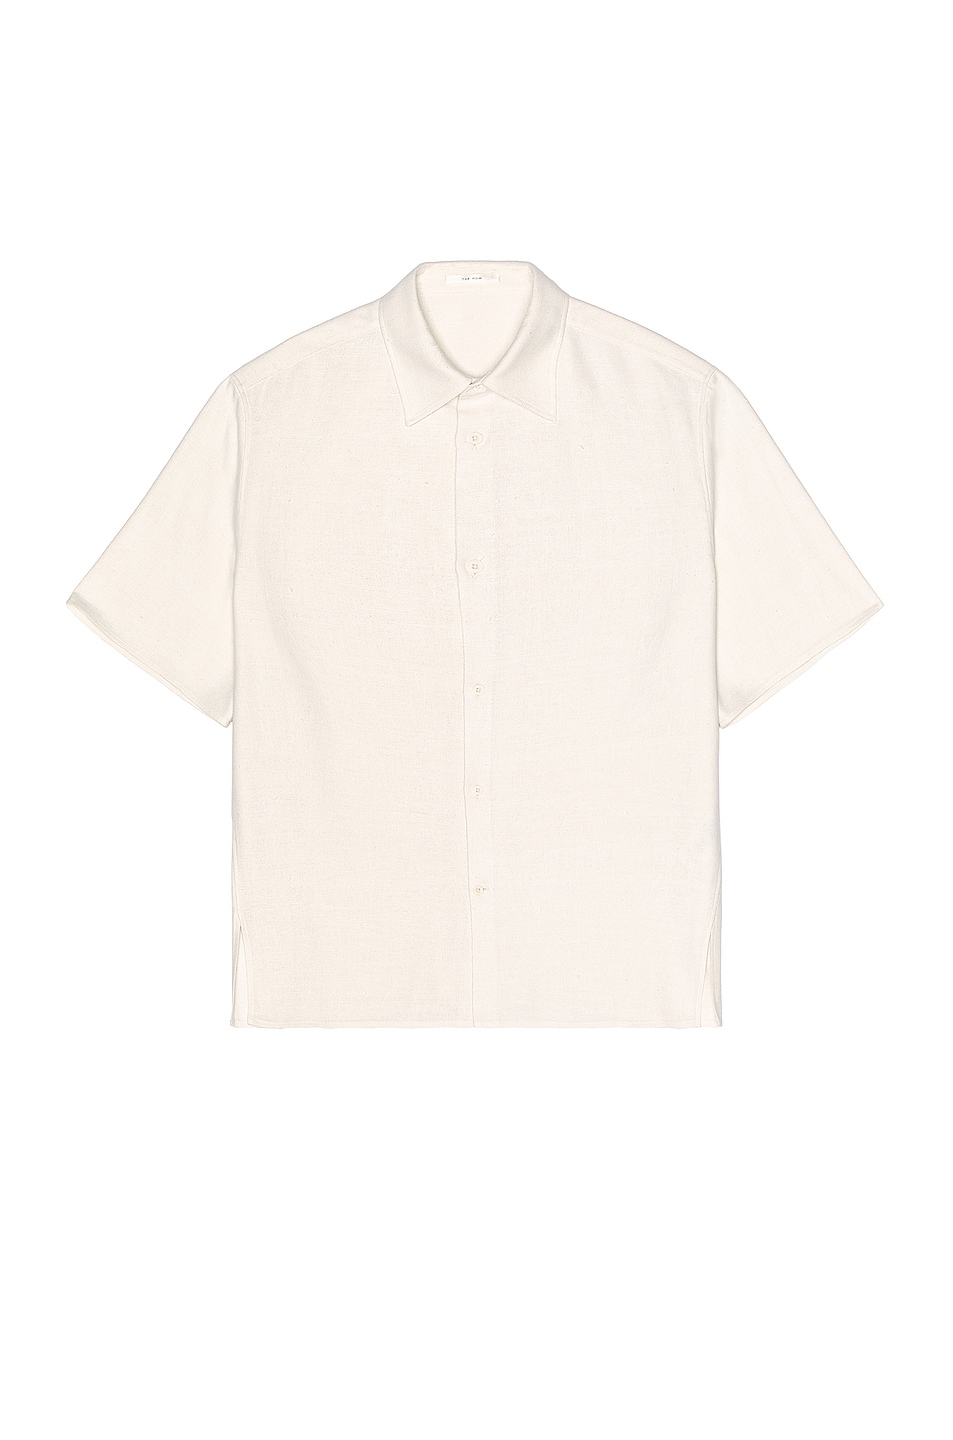 Image 1 of The Row Patrick Shirt in Ivory